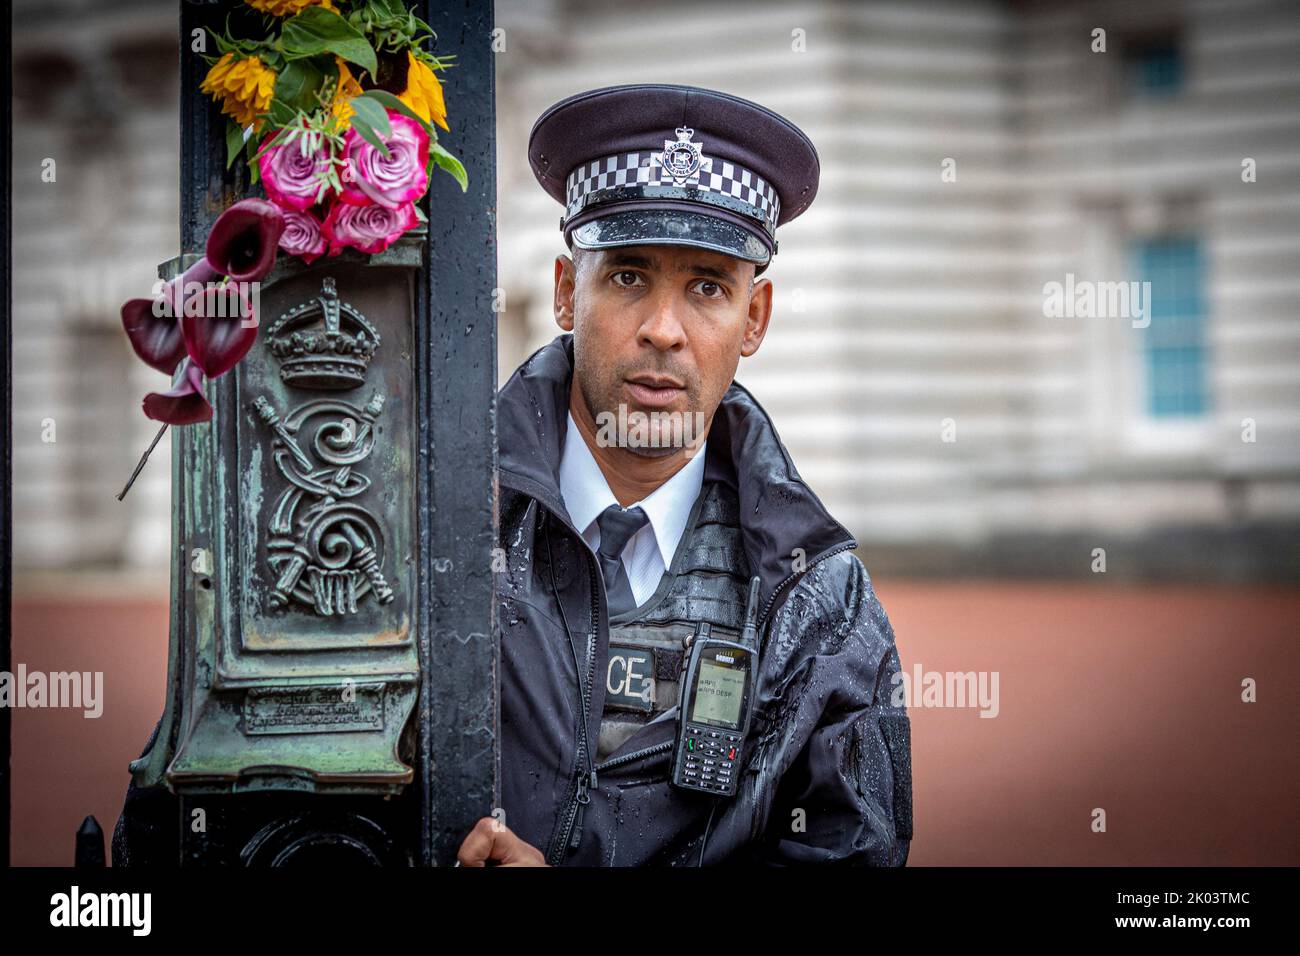 London UK. 9 September 2022. Police officer open gate next to the floral tributes outside Buckingham palace to HM Queen Elizabeth II, who died aged 96 years in Balmoral Scotland as the longest serving British monarch and will be succedded by her son King Charles III .Photo Horst A. Friedrichs Alamy Live News Stock Photo